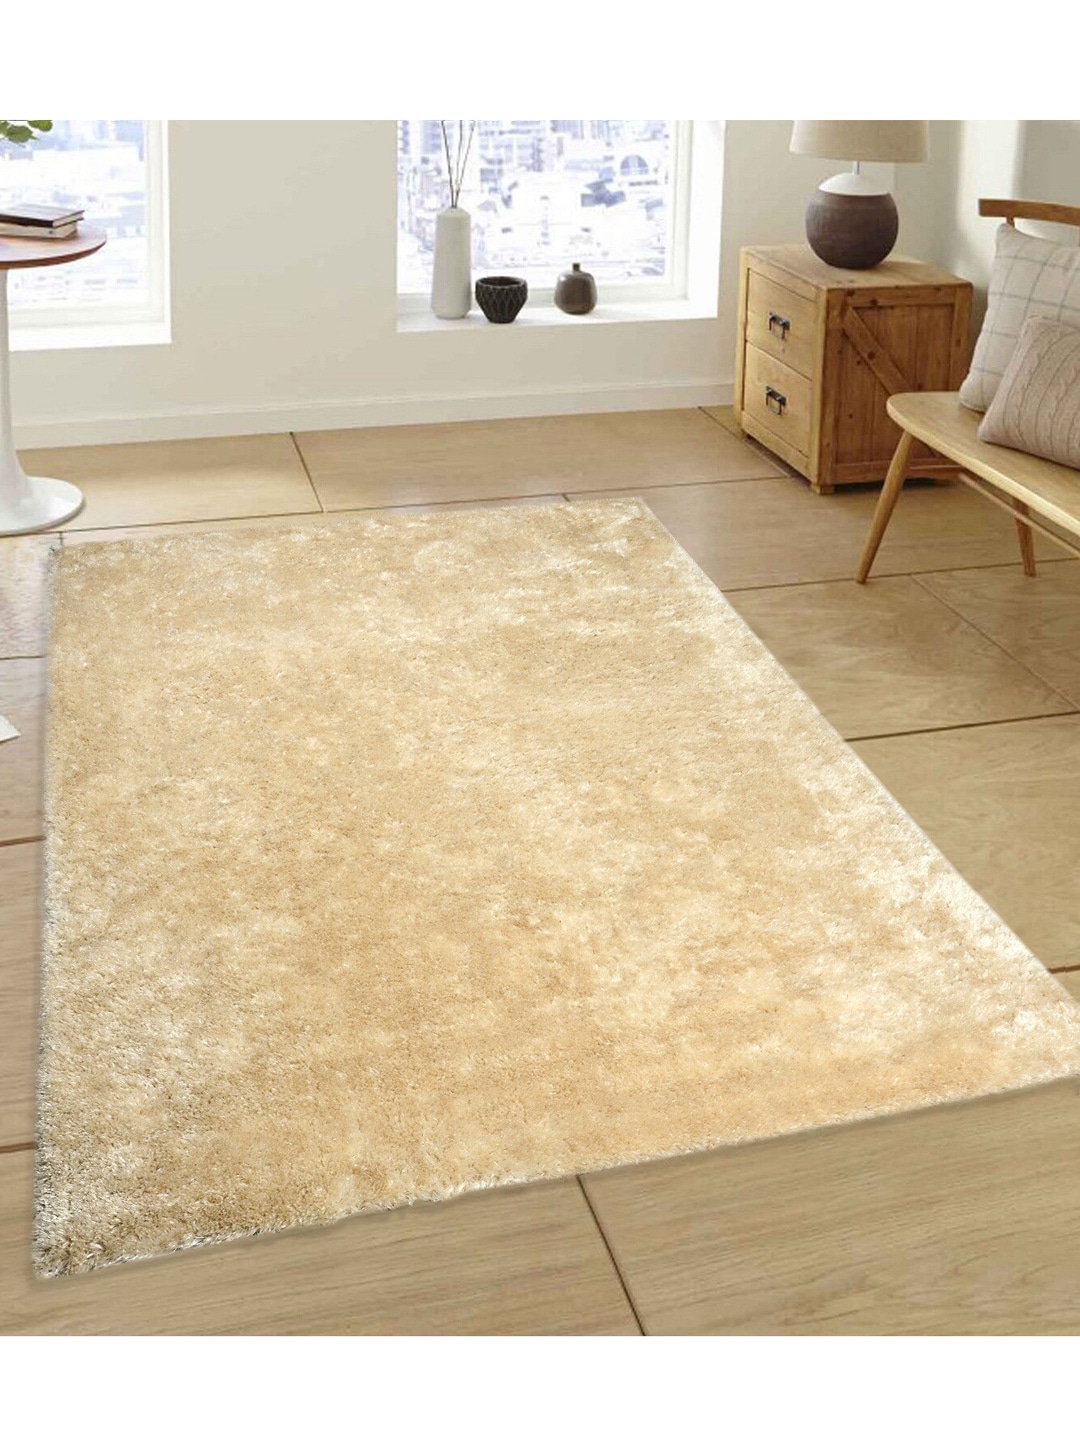 Saral Home Beige Solid Cotton Carpet Price in India